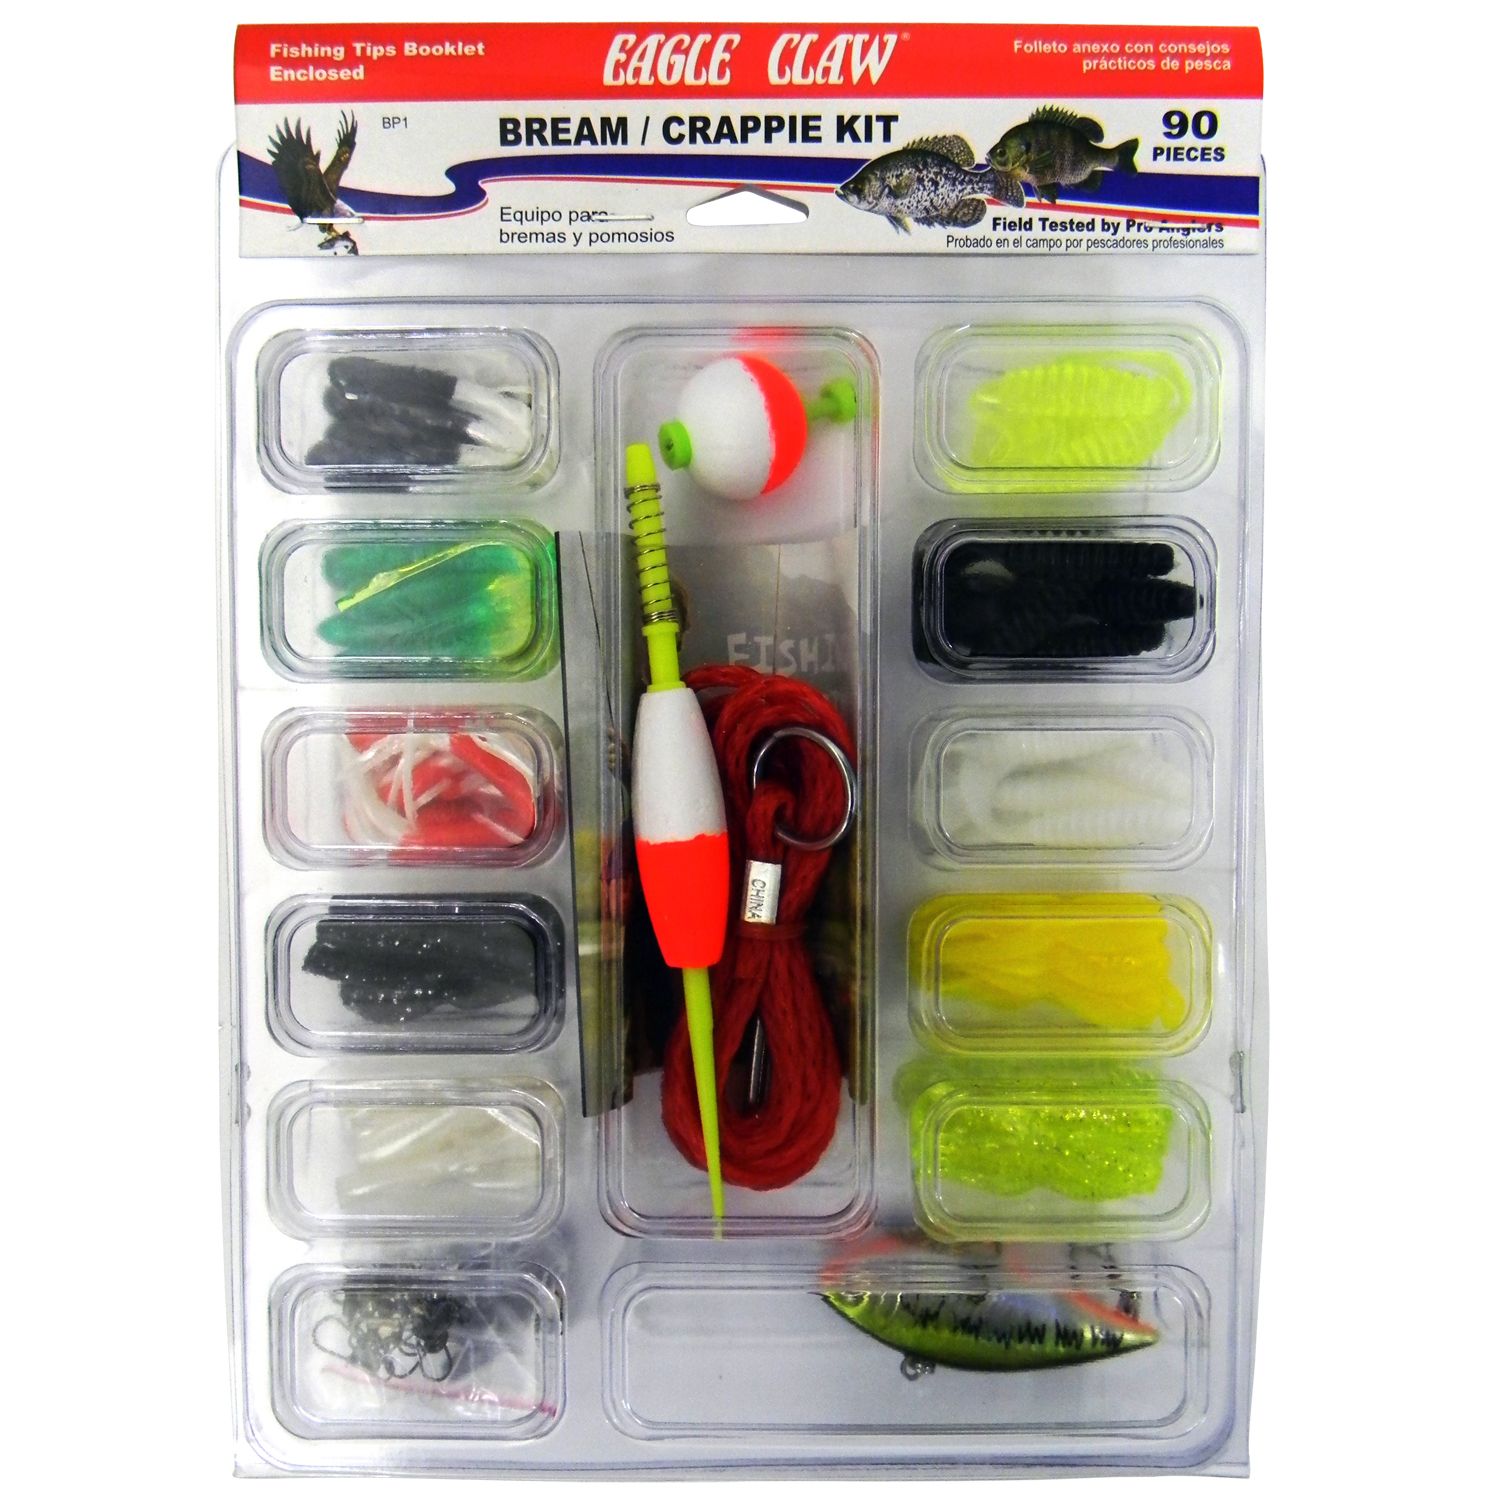 Dick's Sporting Goods Eagle Claw Bream/Crappie Kit